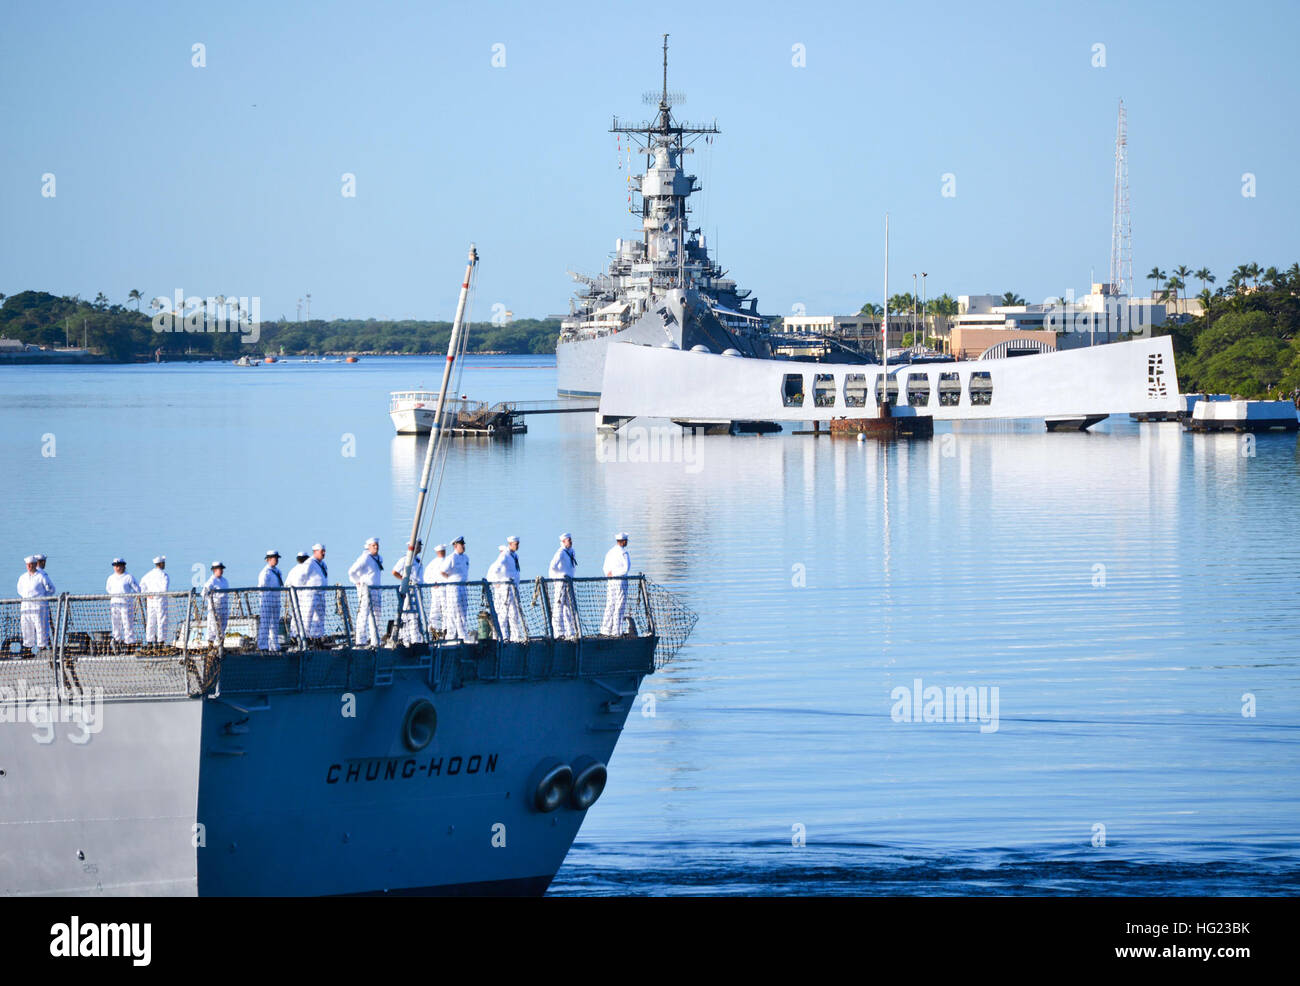 The guided-missile destroyer USS Chung-Hoon (DDG 93) conducts a pass-in-review by the USS Arizona Memorial during the 73rd Anniversary Pearl Harbor Day commemoration ceremony at the Pearl Harbor Visitor Center. More than 2,000 guests, including Pearl Harbor survivors and other veterans, attended the National Park Service and U.S. Navy-hosted joint memorial ceremony at the World War II Valor in the Pacific National Monument. This year's theme focused on 'Preserving the Memory.' (U.S. Navy photo by Mass Communication Specialist 1st Class Katherine Hofman/Released) USS Chung-Hoon operations 14120 Stock Photo